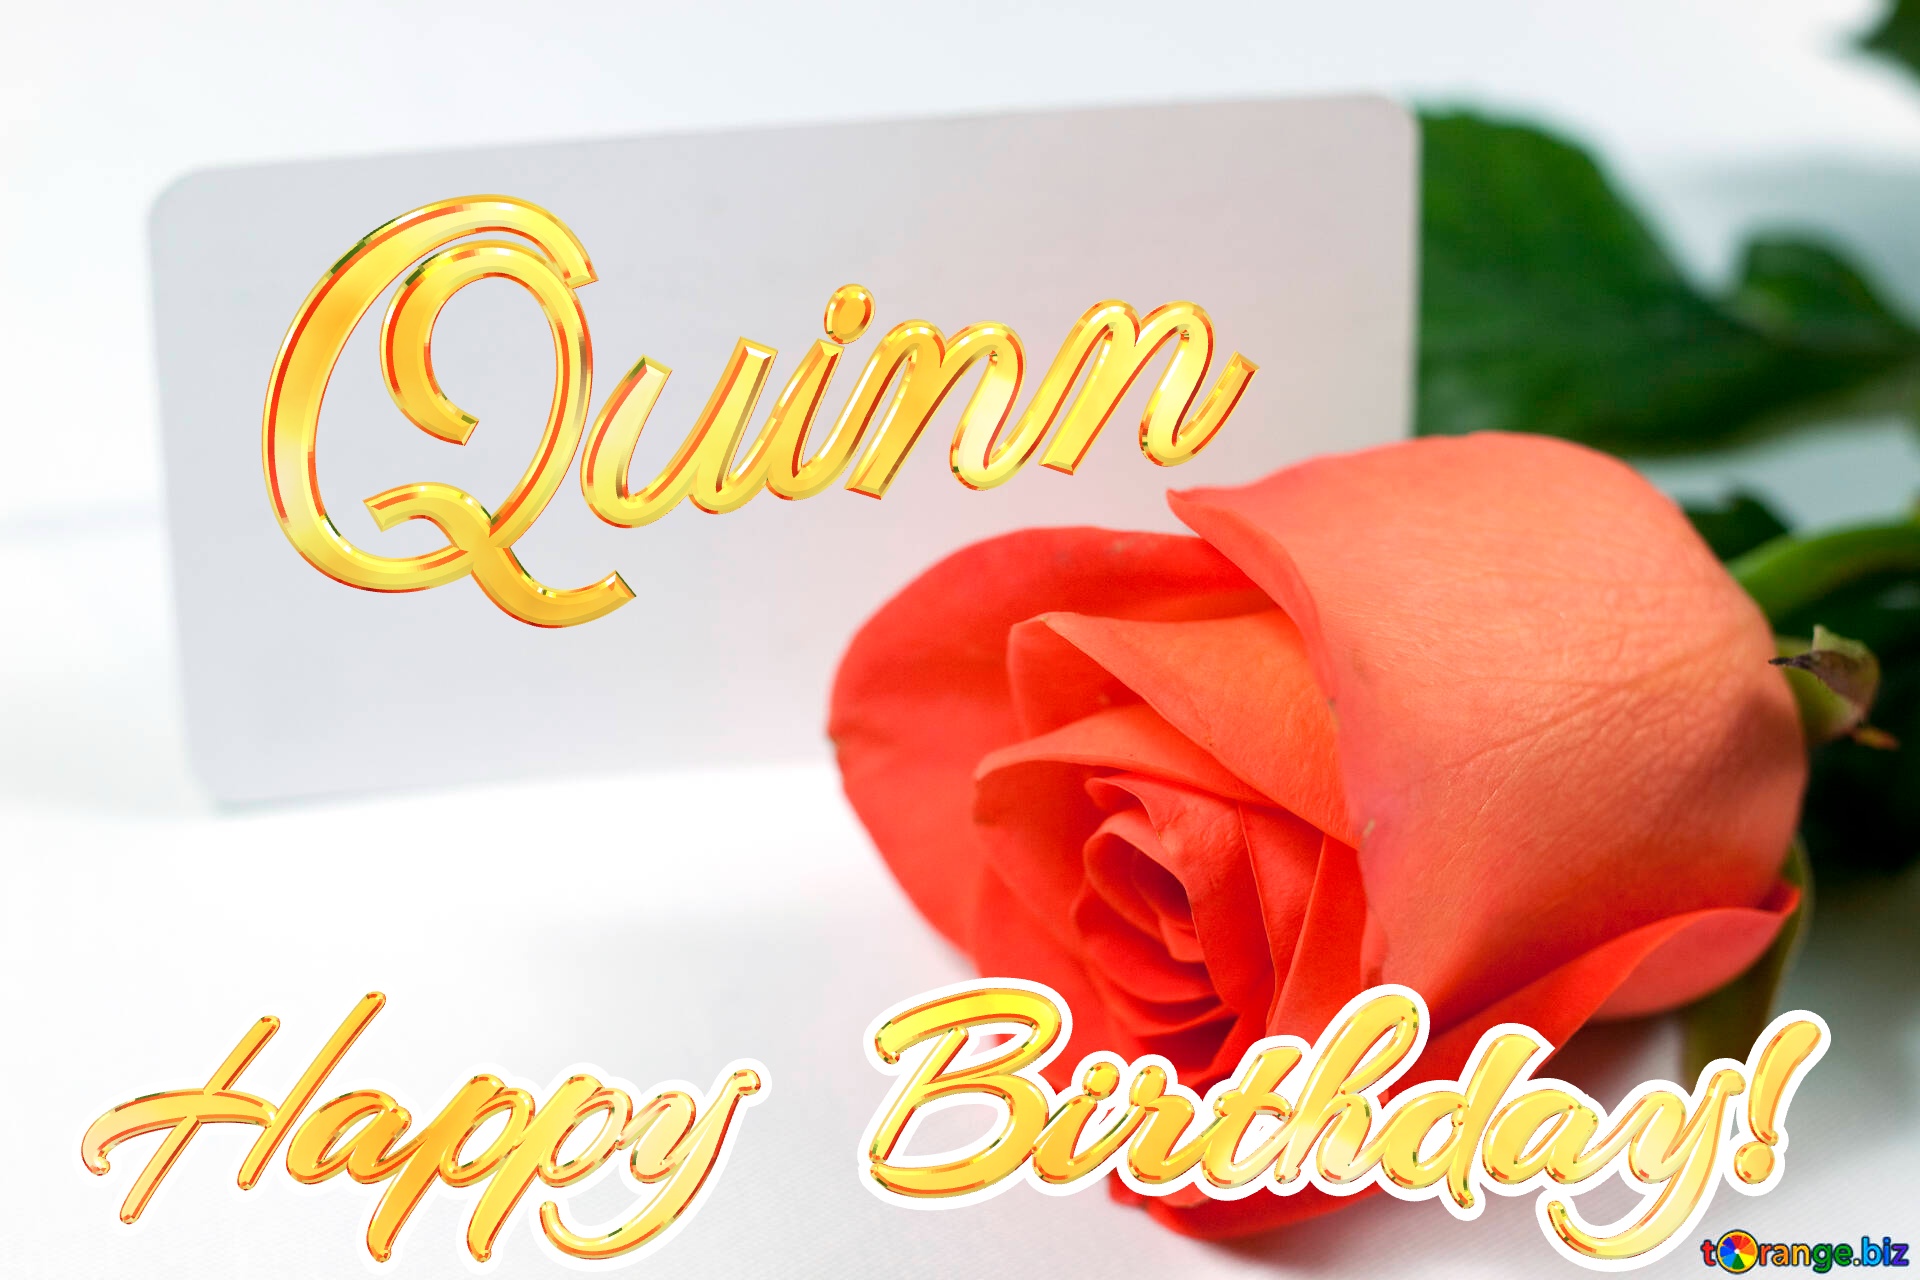 Happy  Birthday! Quinn  Rosa   business card . On  White  background. №7233